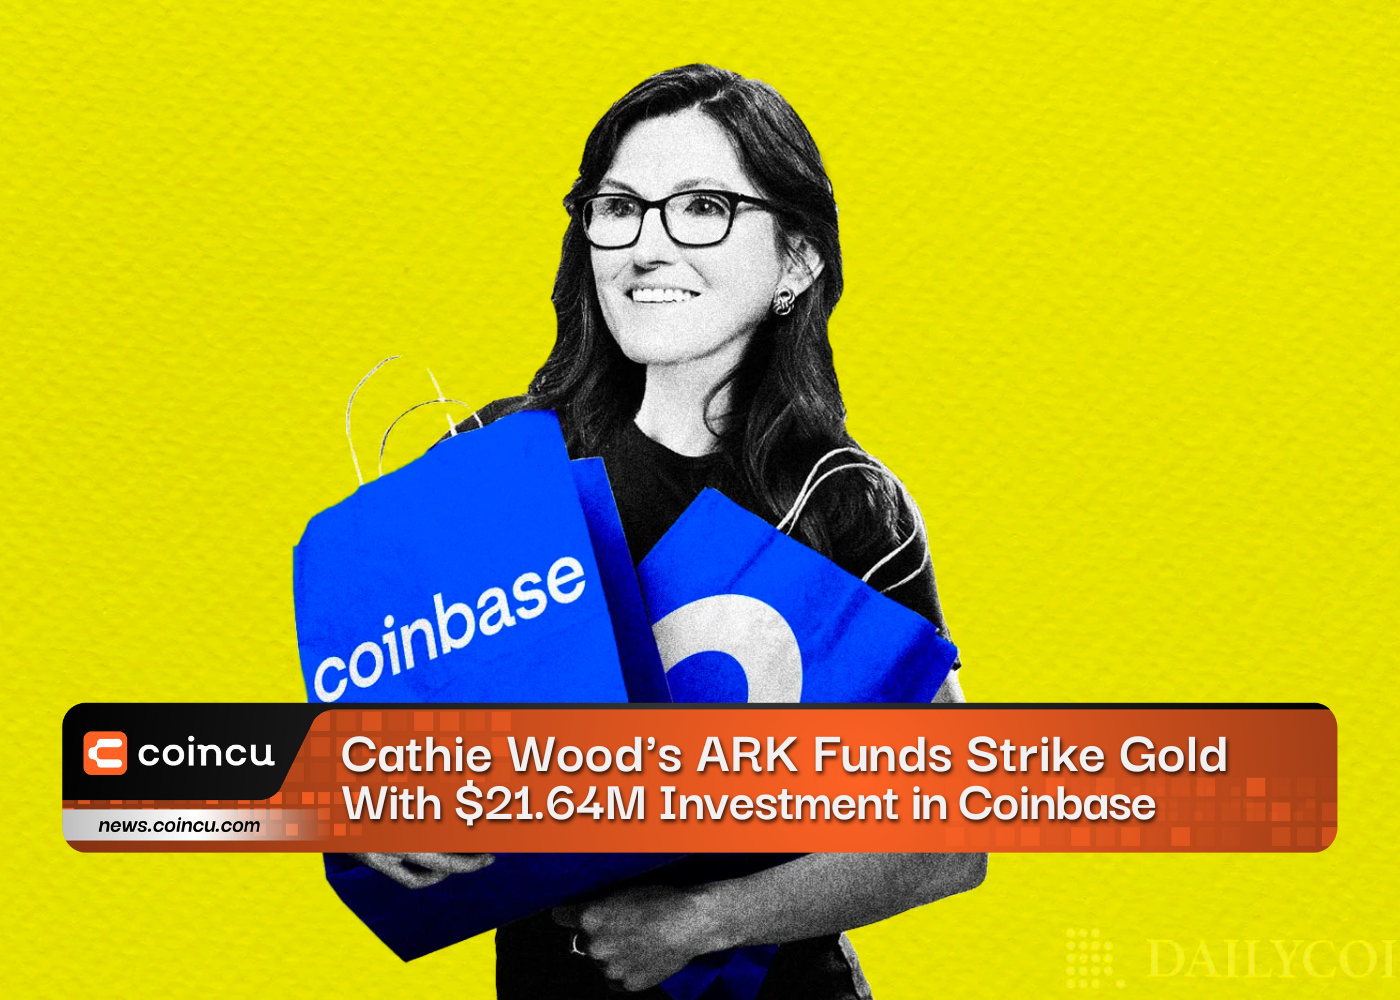 Cathie Woods ARK Funds Strike Gold